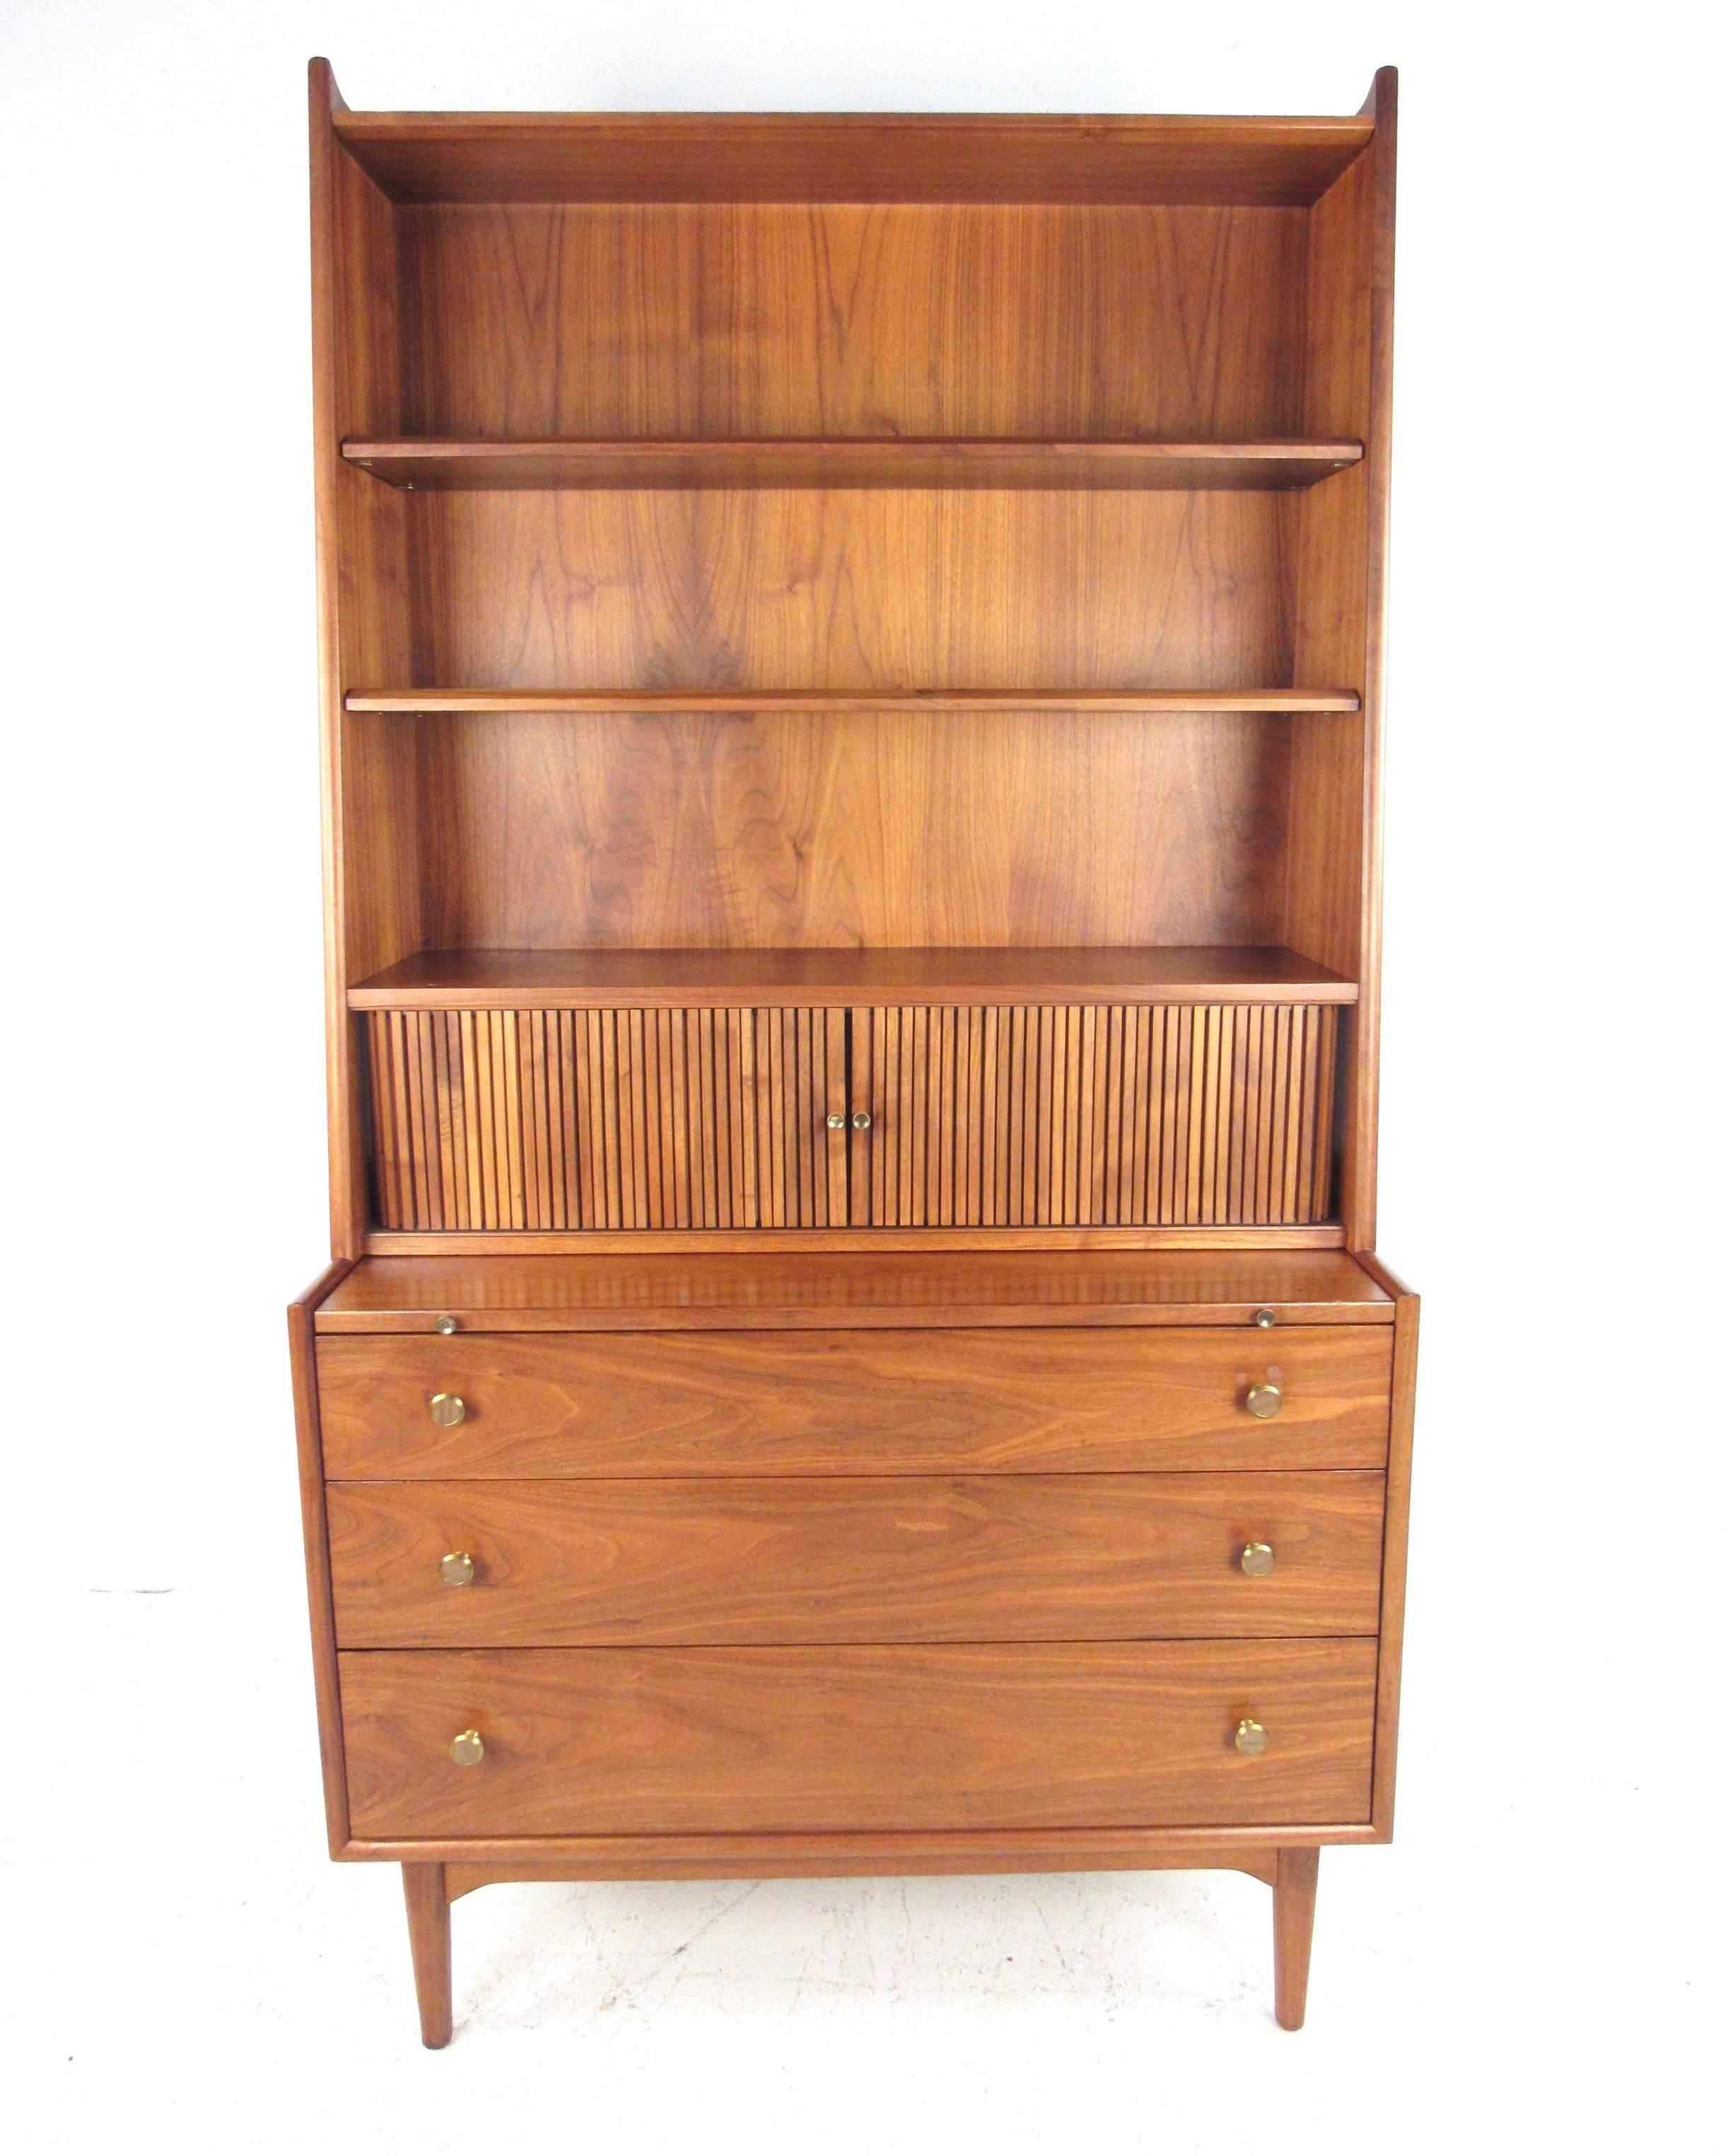 This vintage American walnut bookcase features Drexel Furniture design with beautiful hardwood finish. Unique brass trim on handles add to the Mid-Century style, while tambour desktop cabinet adds room for organization and storage about pull-out